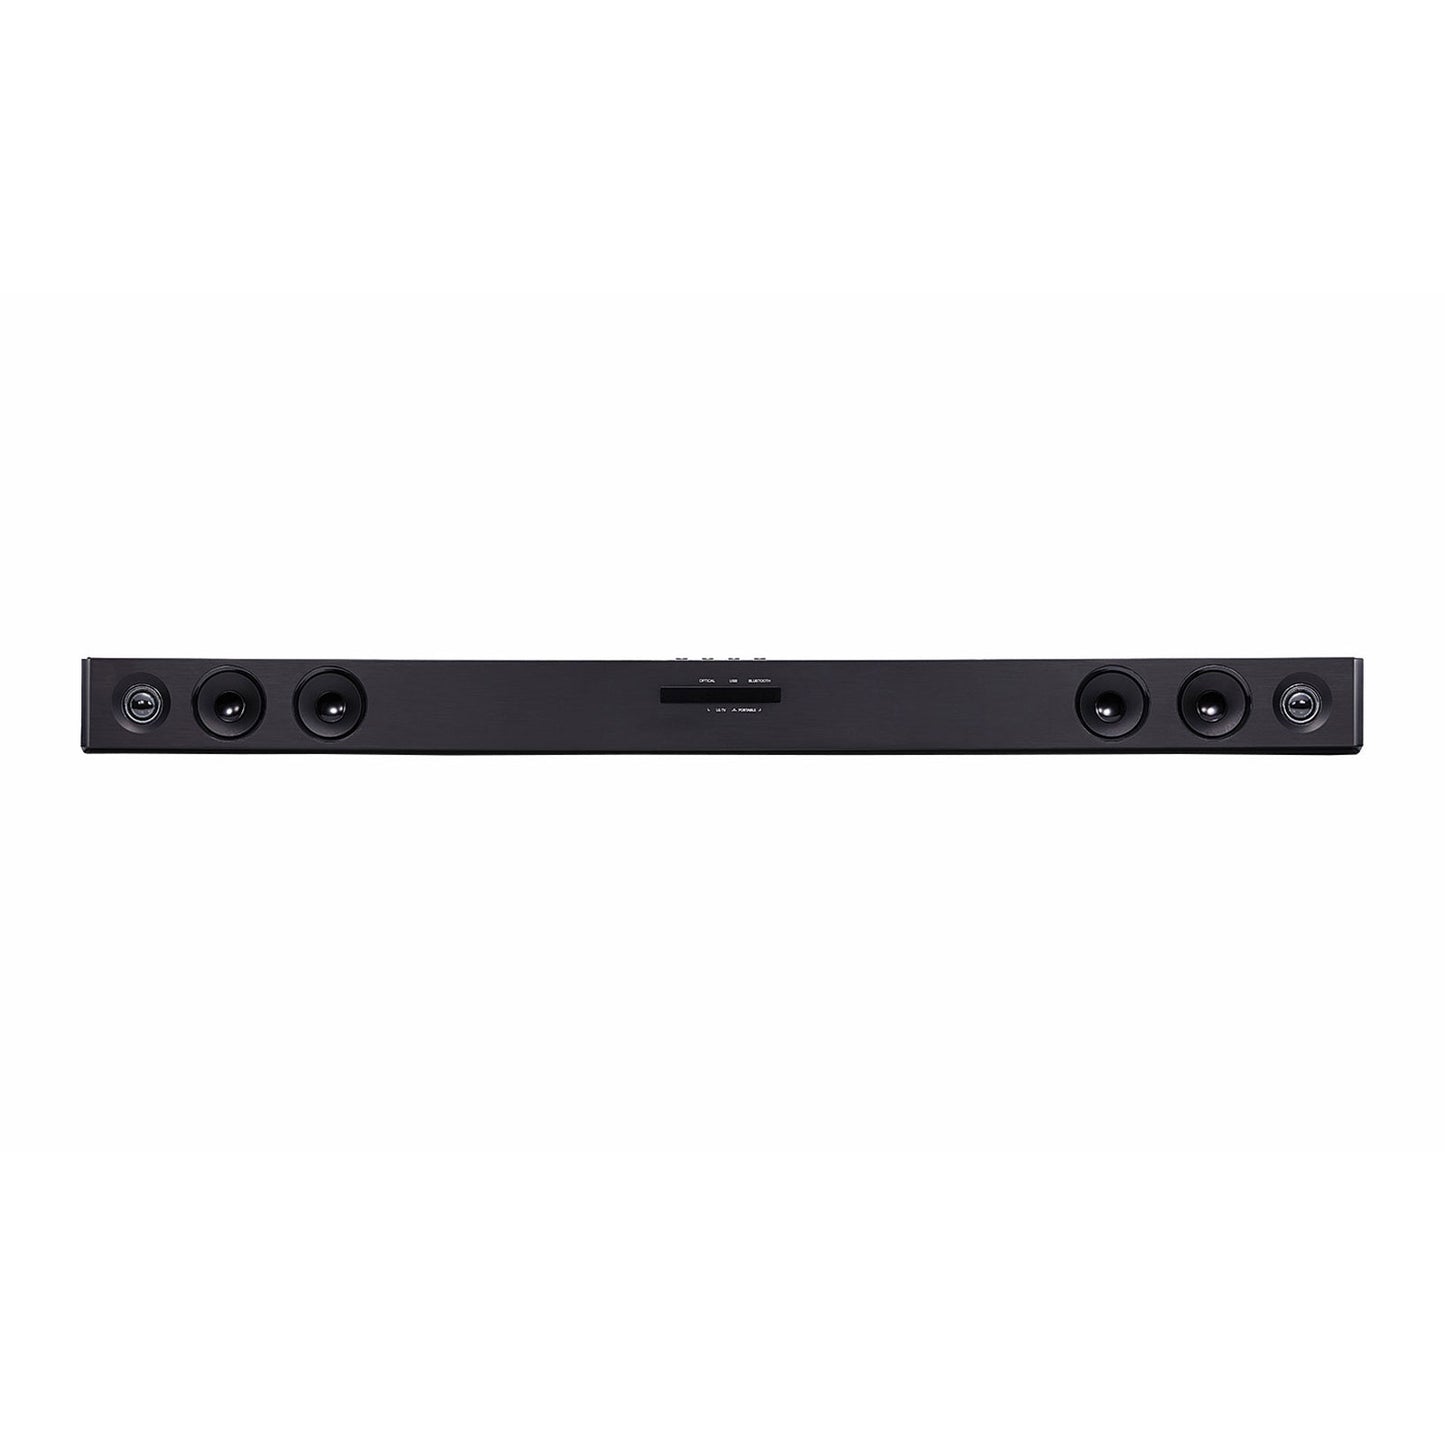 LG 2.0 ch Sound Bar with Bluetooth Connectivity SK1D